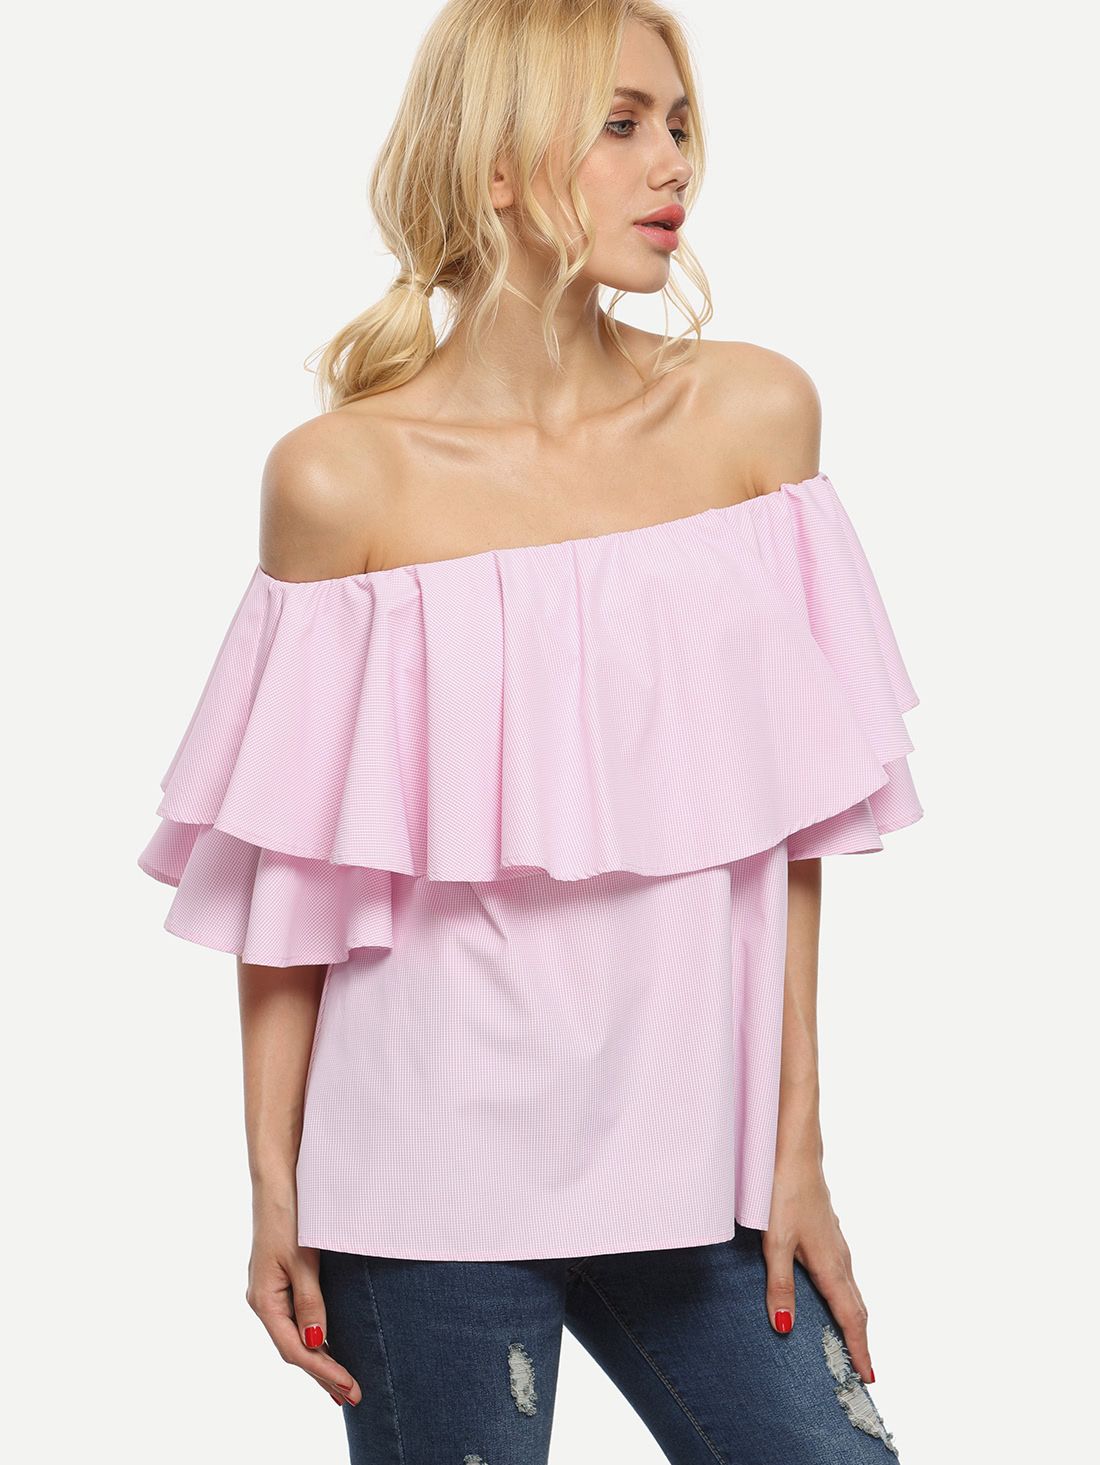 Pink Off The Shoulder Ruffle Blouse | SHEIN